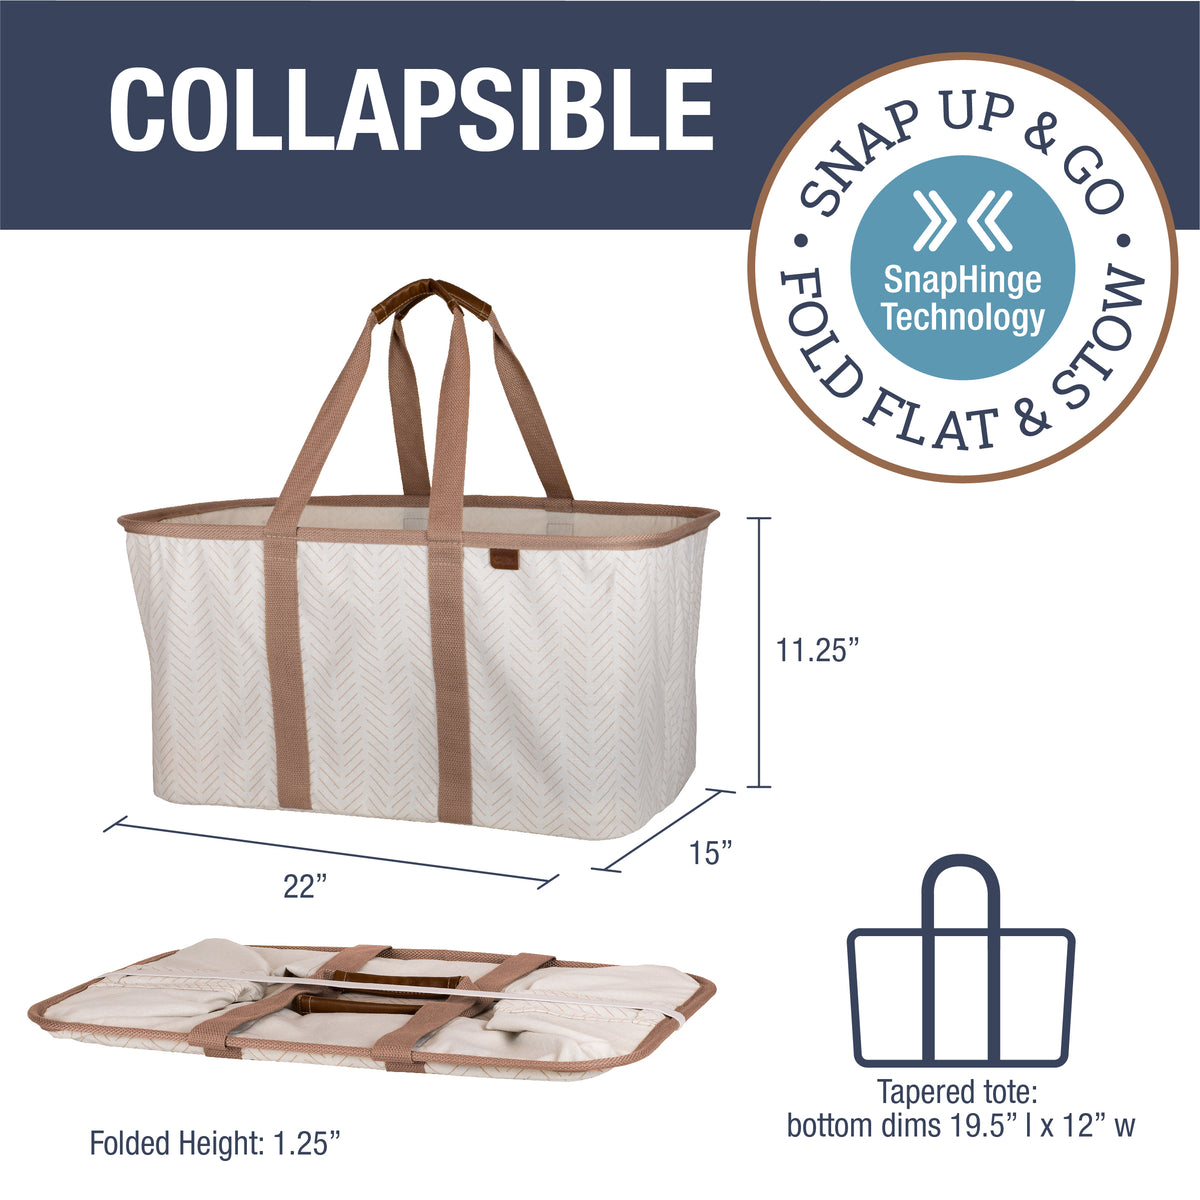 Collapsible Laundry Basket - CleverMade